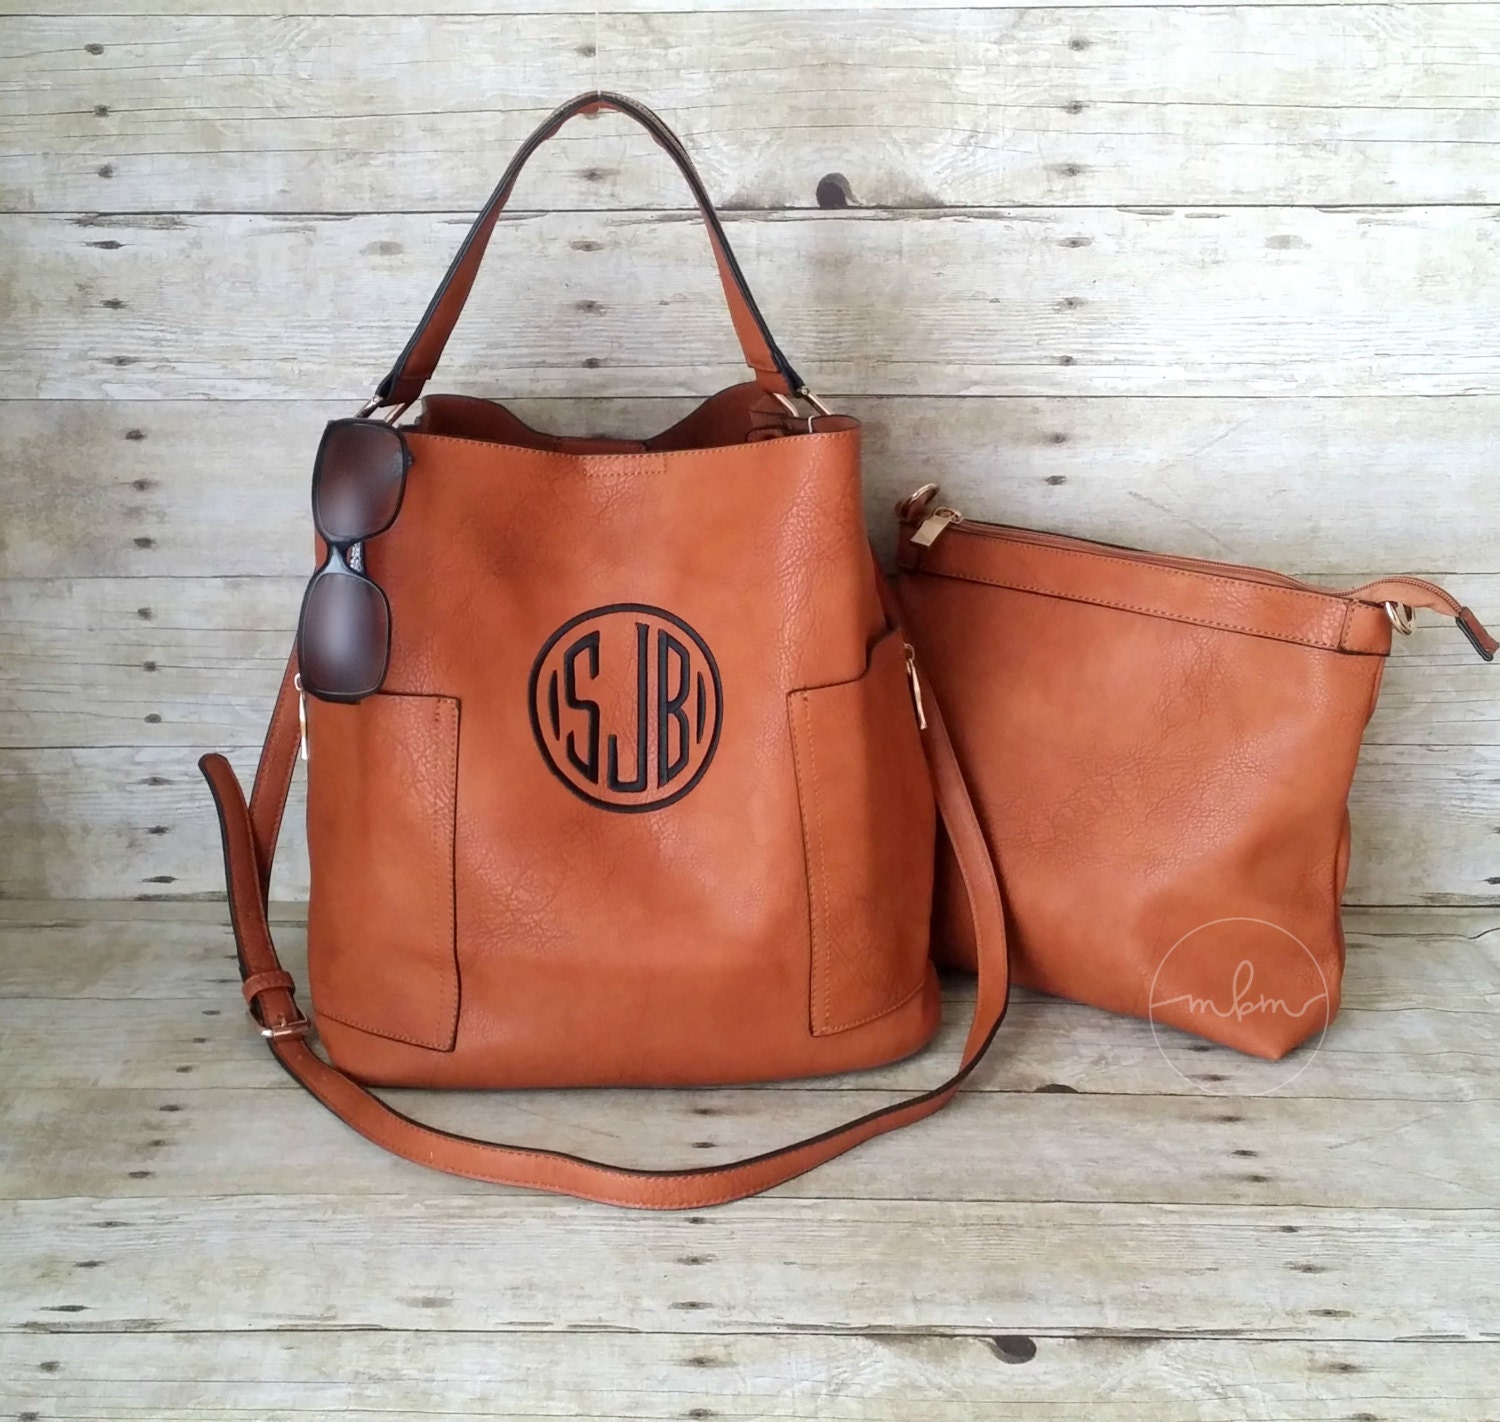 Monogram Purse Monogrammed Brown Purse by MaBrownMercantile